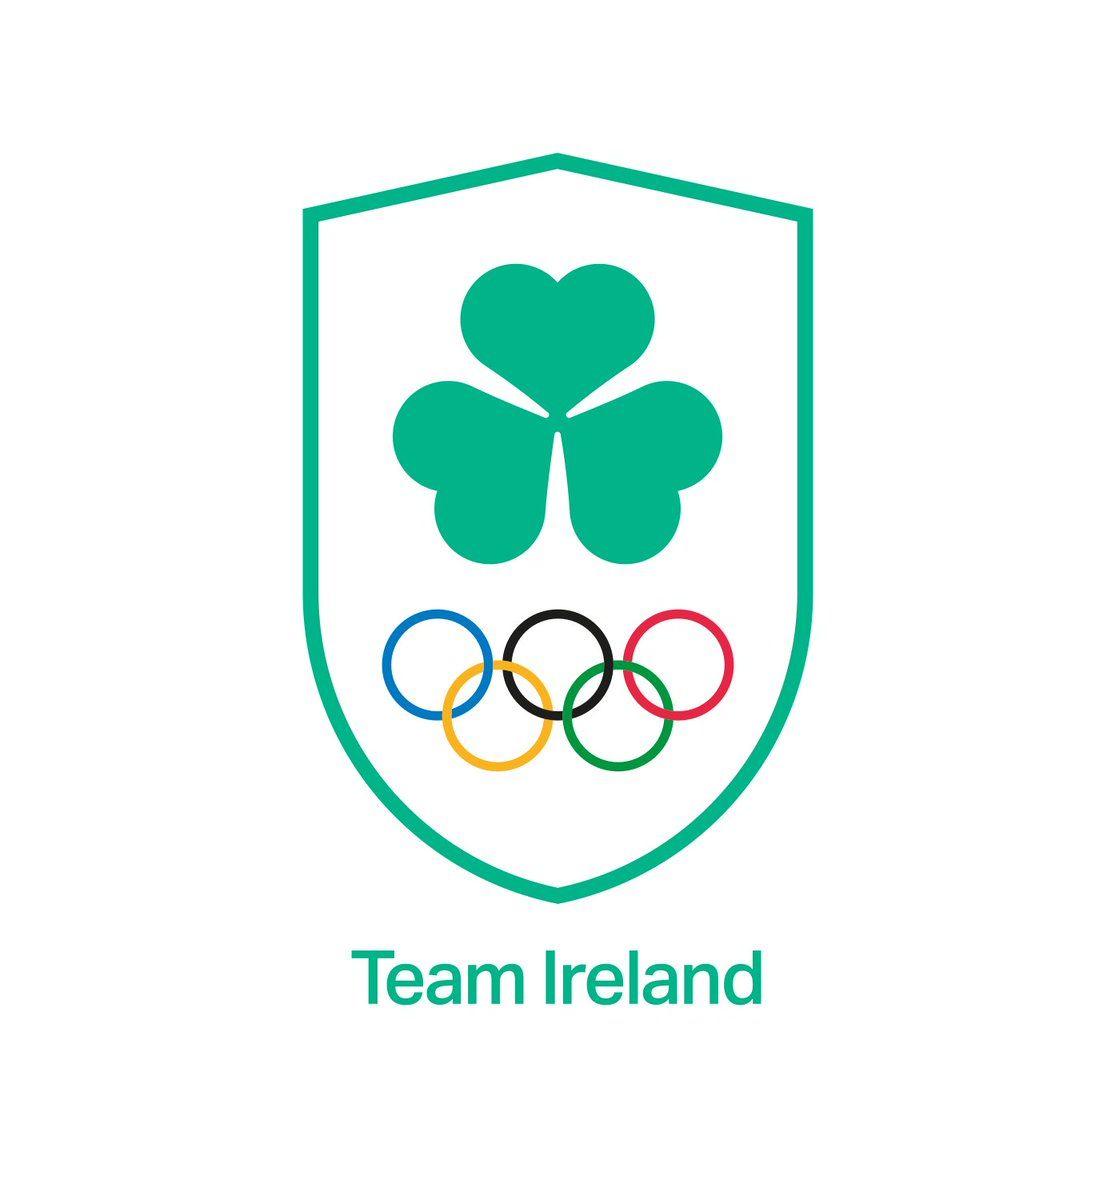 OCI Logo - Team Ireland we unveiled our new logo and new